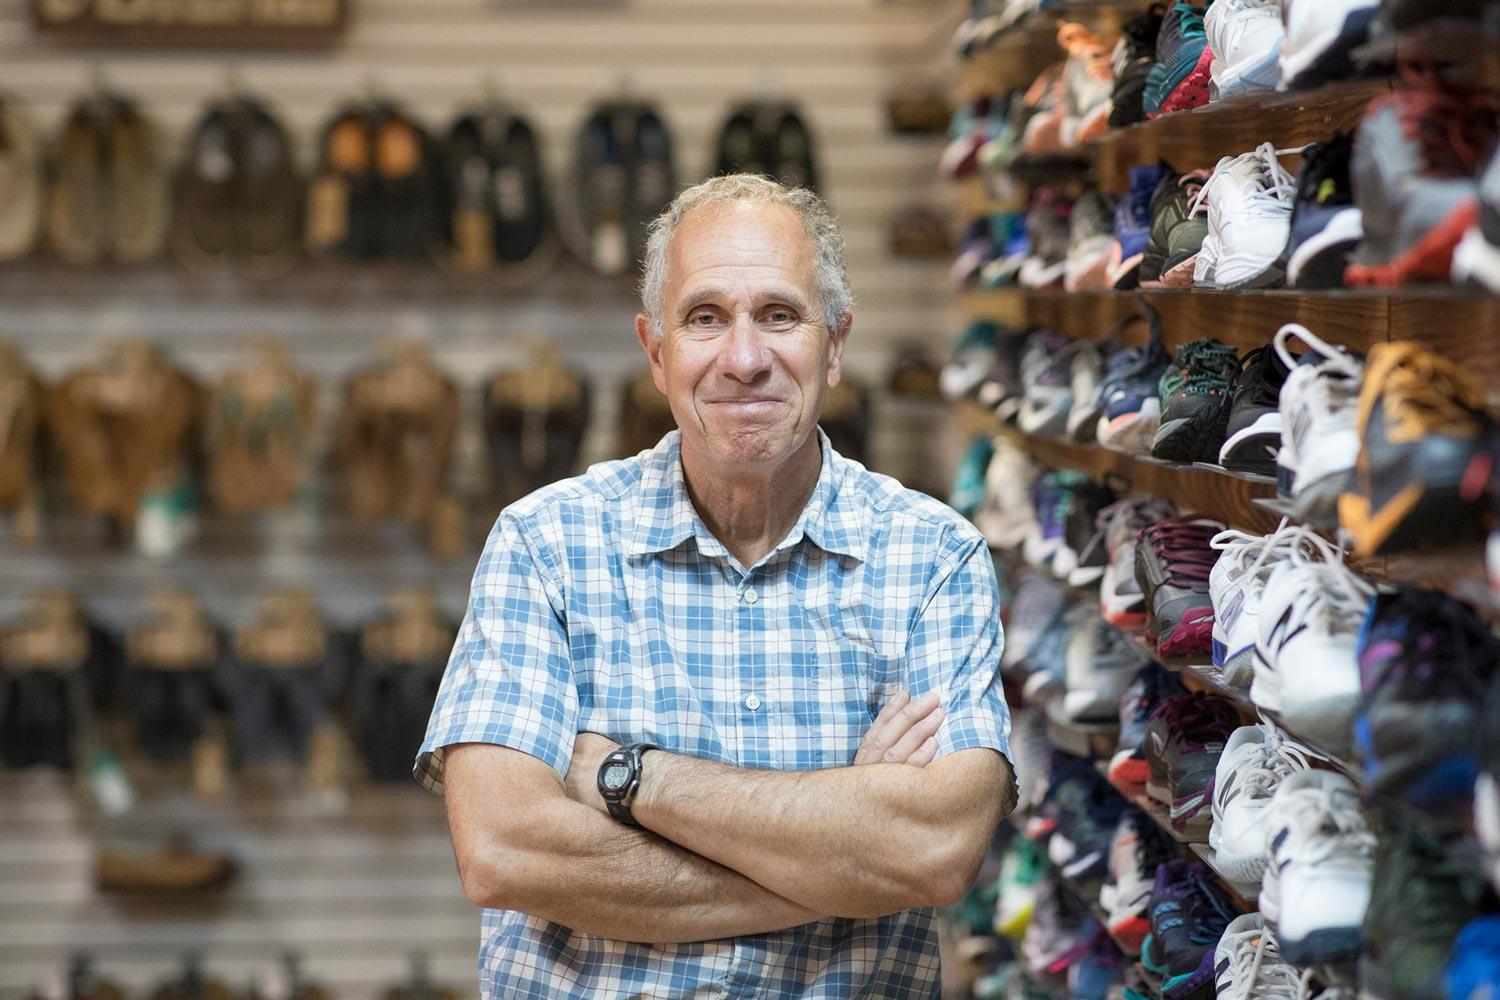 Mark Lorenzoni stands with arms crossed next to a wall full of shoes